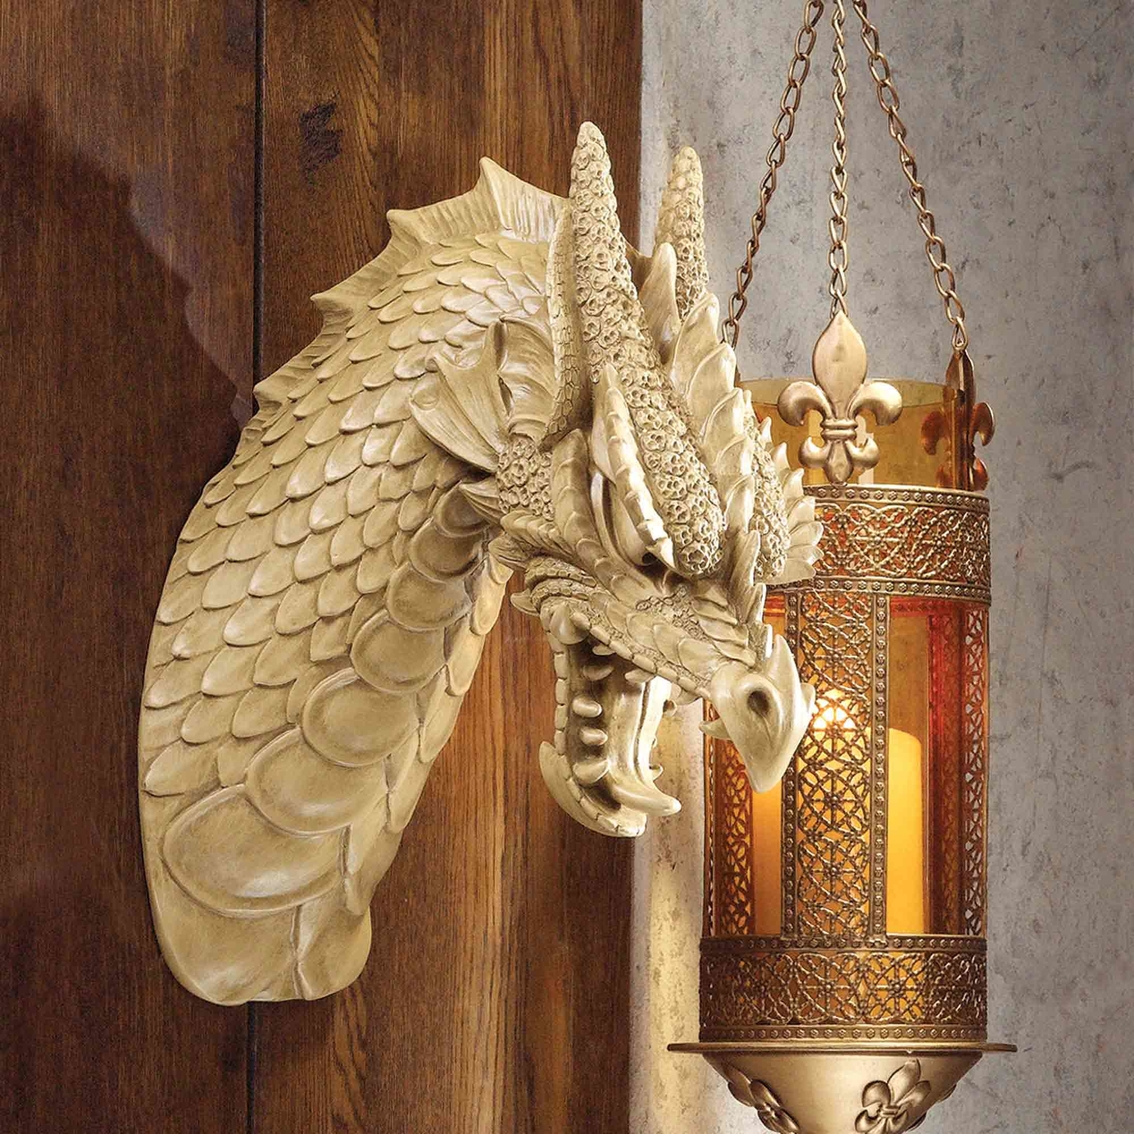 Design Toscano Head of the Beast Dragon Wall Sculpture - Image 2 of 2